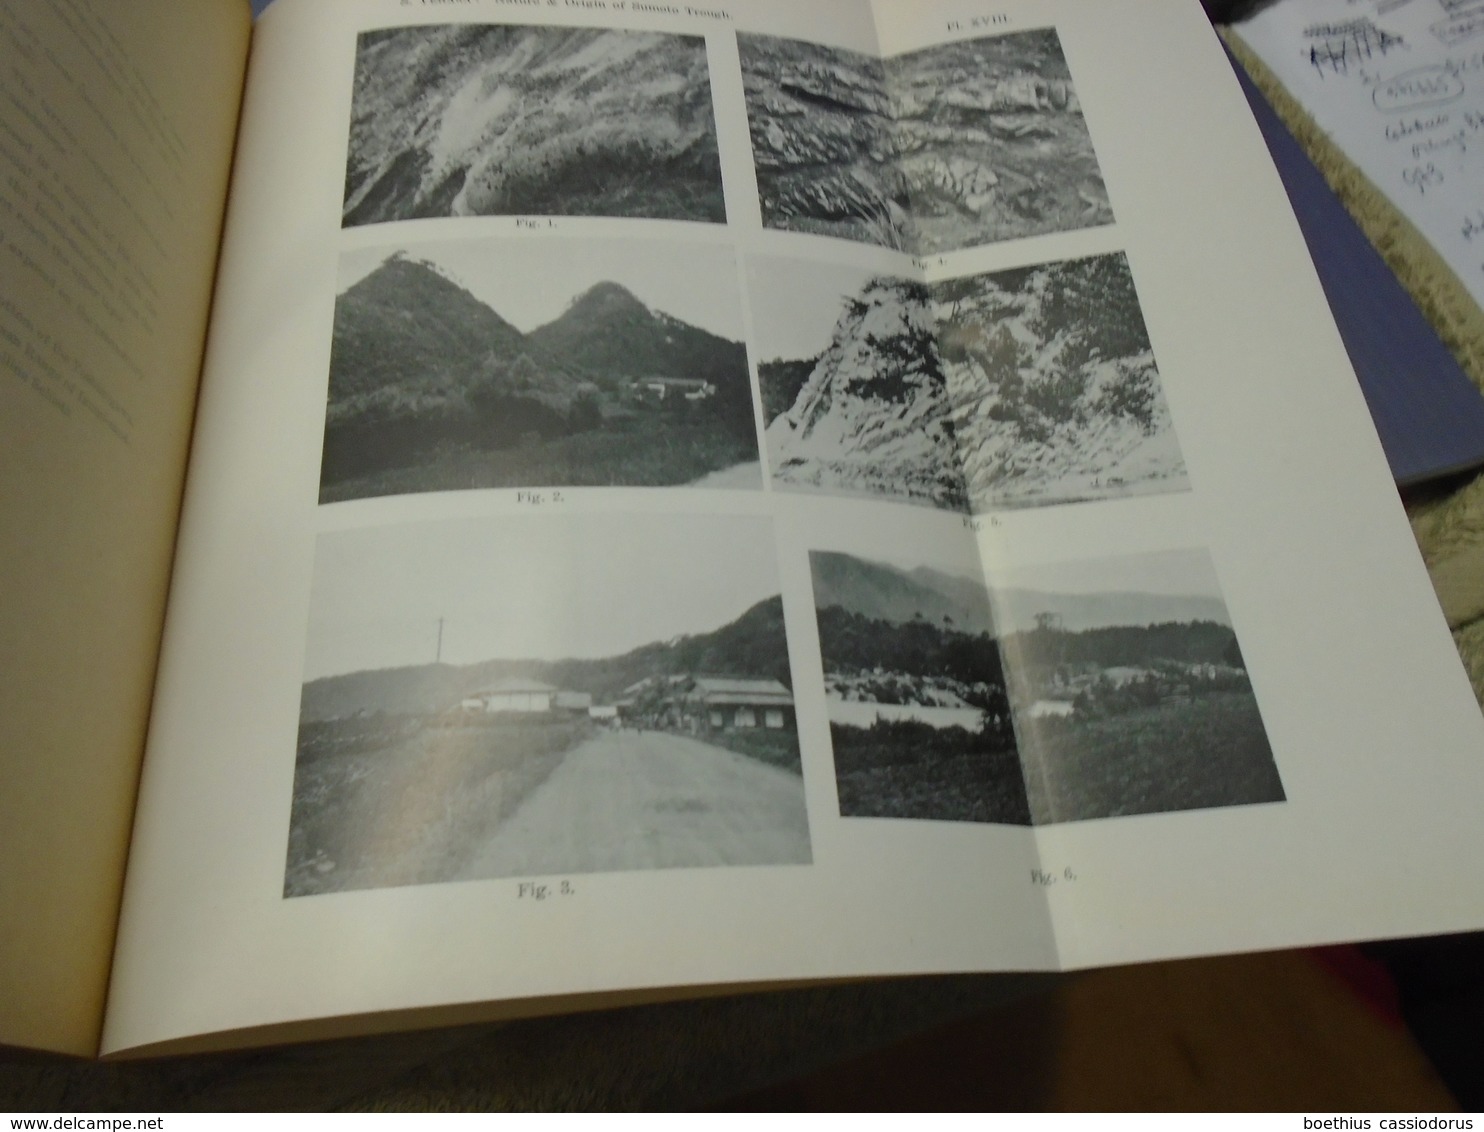 JAPANESE JOURNAL OF GEOLOGY AND GEOGRAPHY Transactions and Abstracts Vol. IX  Nos. 3 and 4 TOKYO March,1932